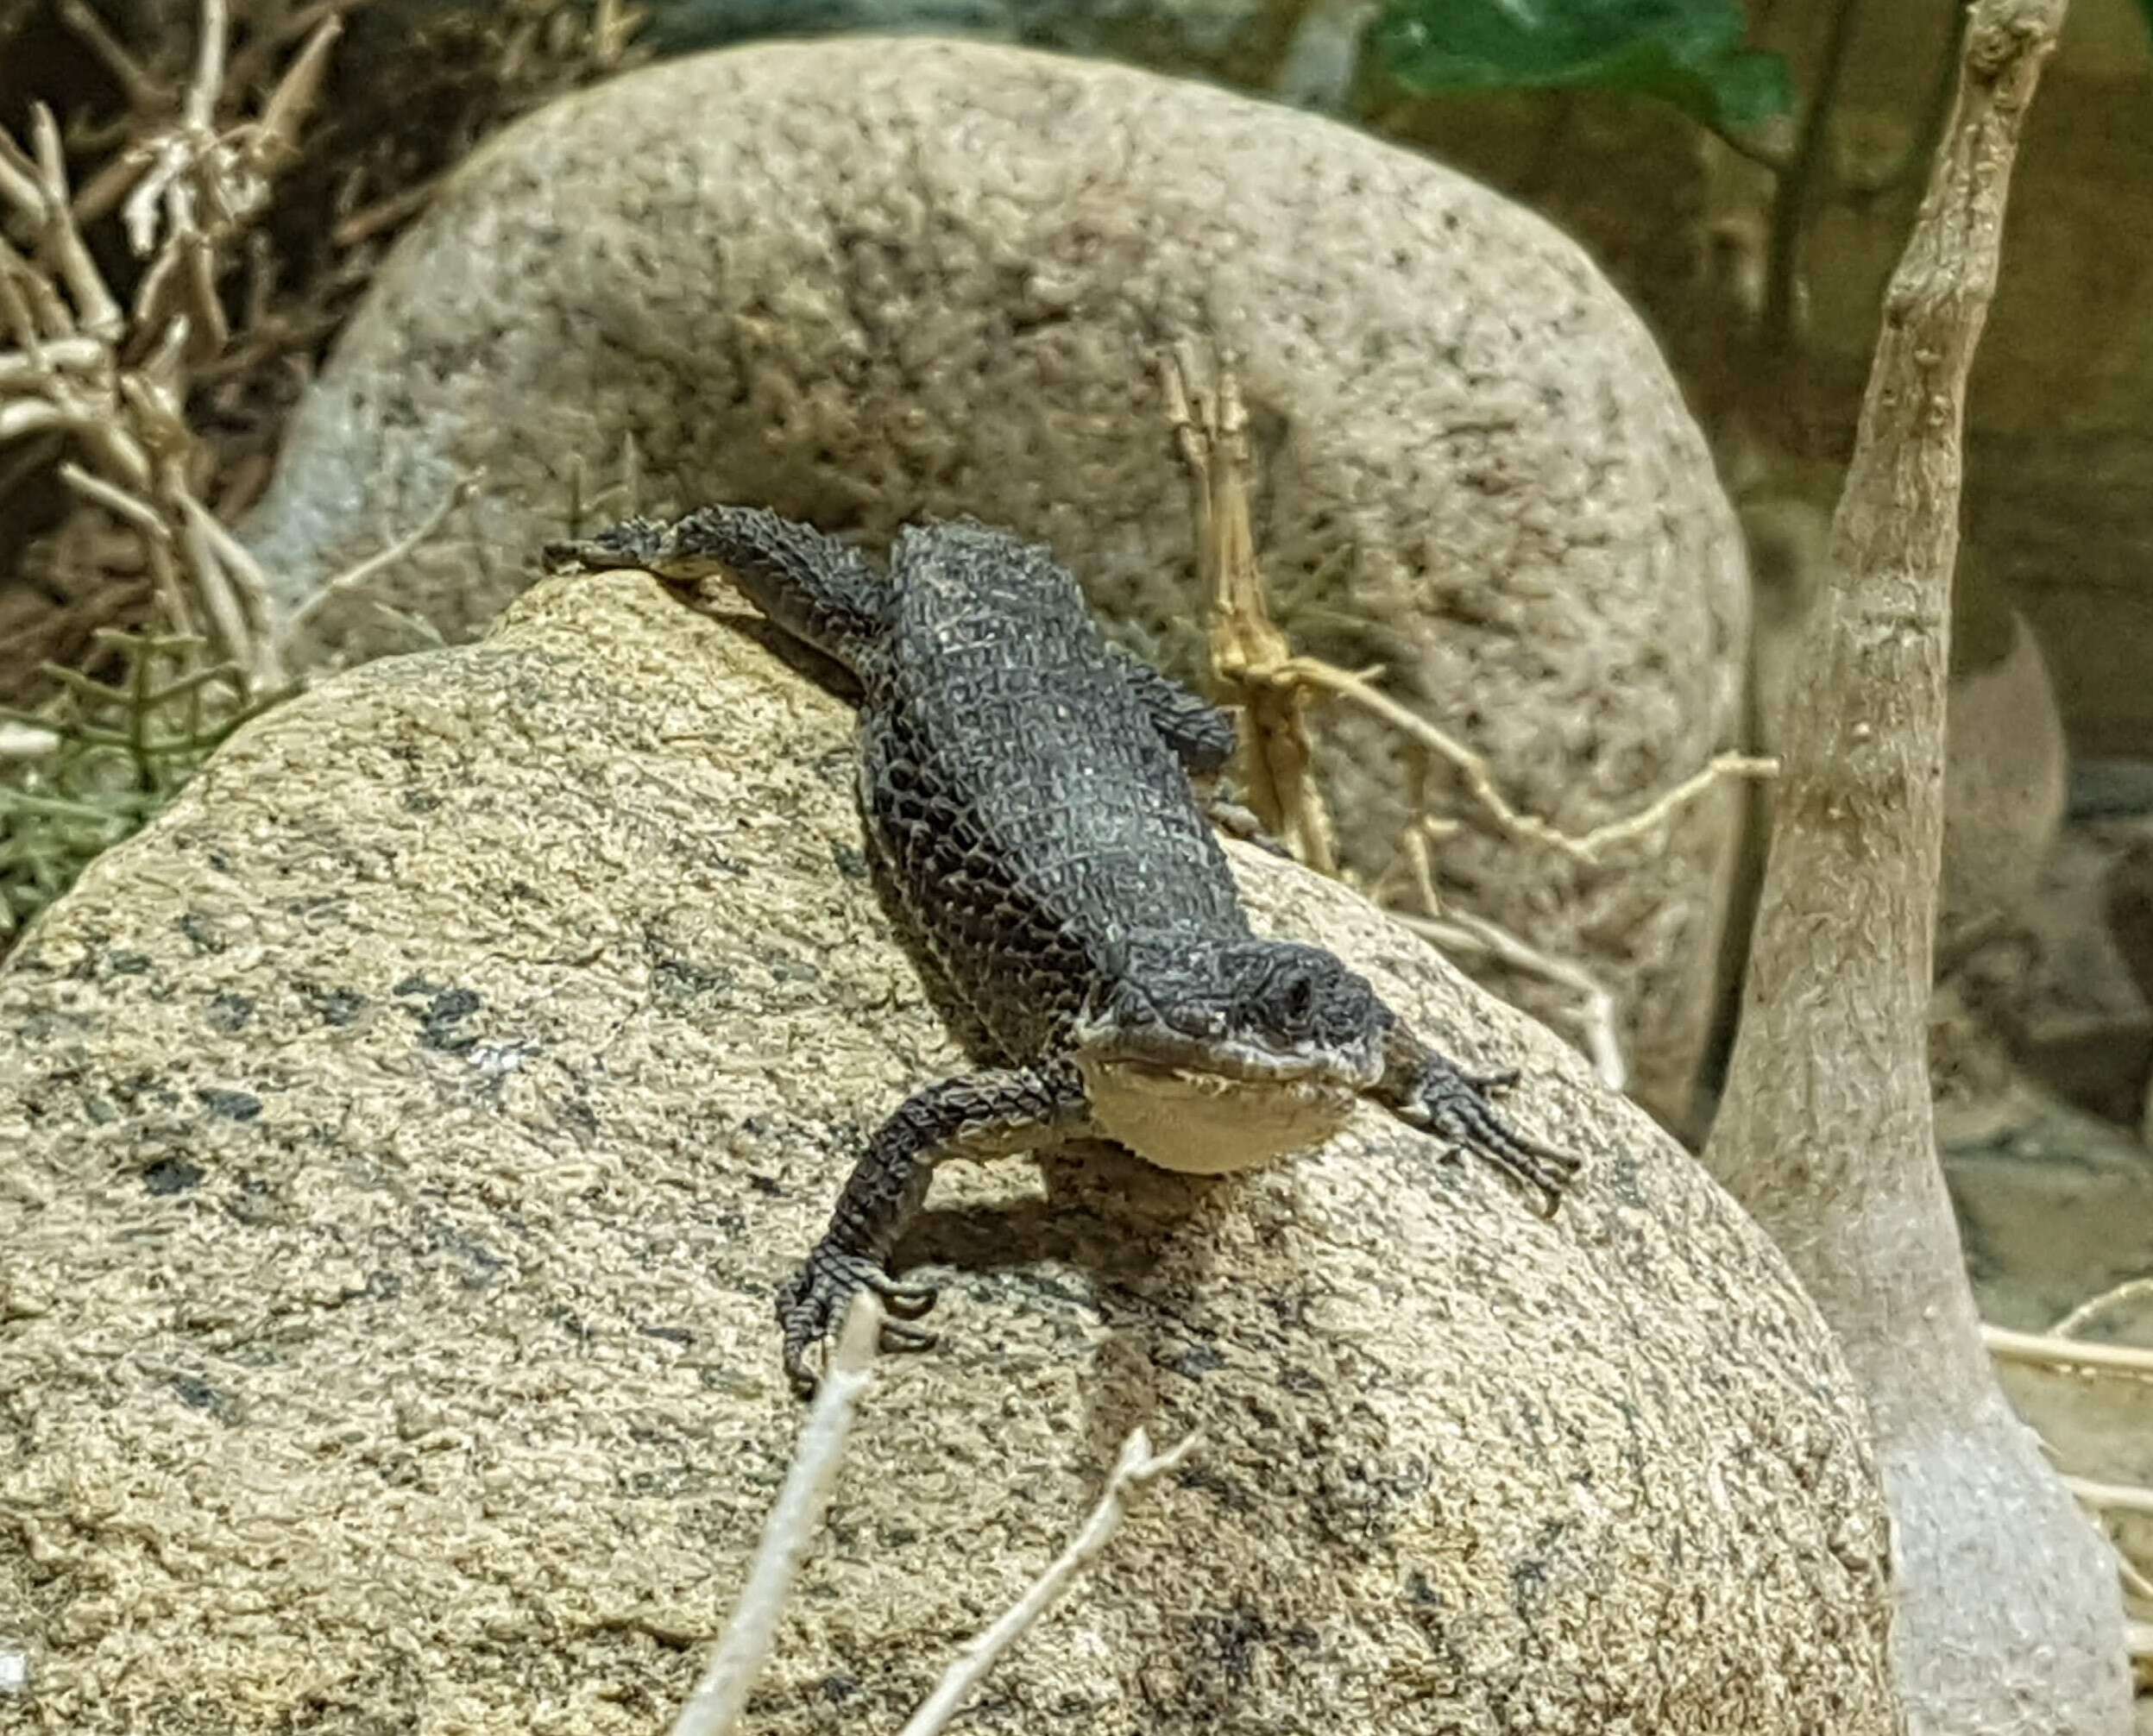 Image of East African spiny-tailed lizard